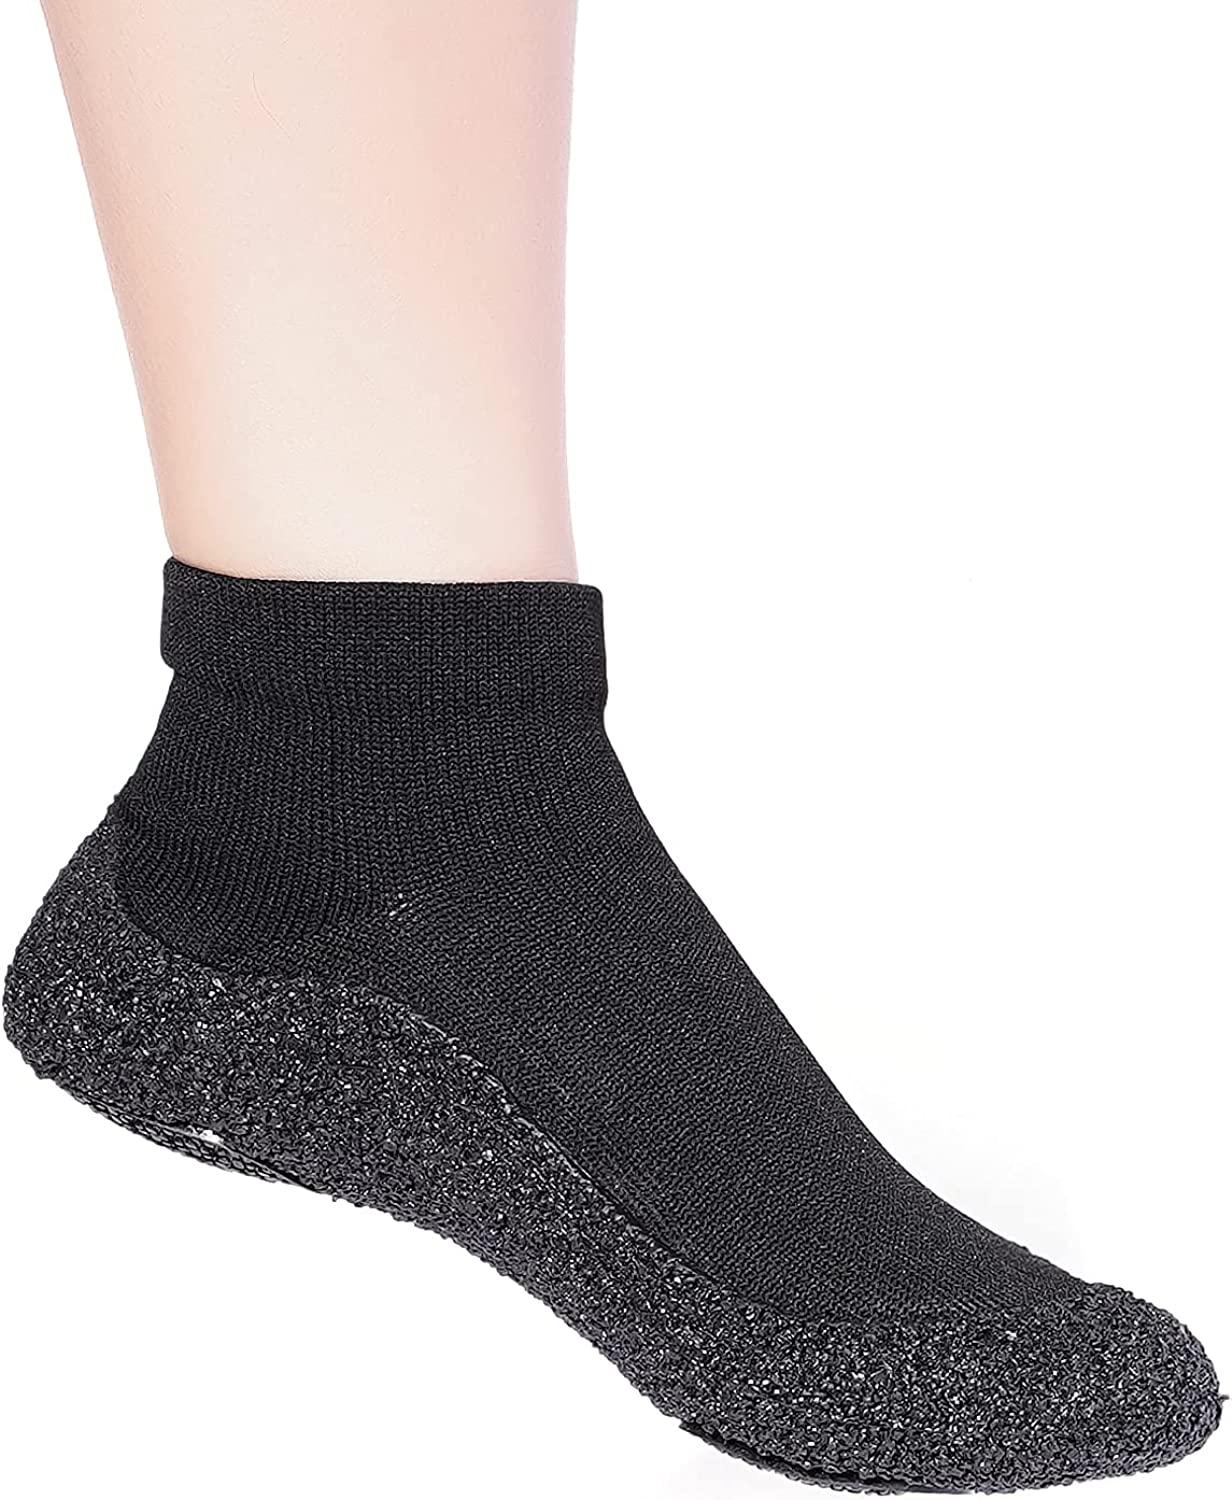 Sock shoes – barefoot shoes for women